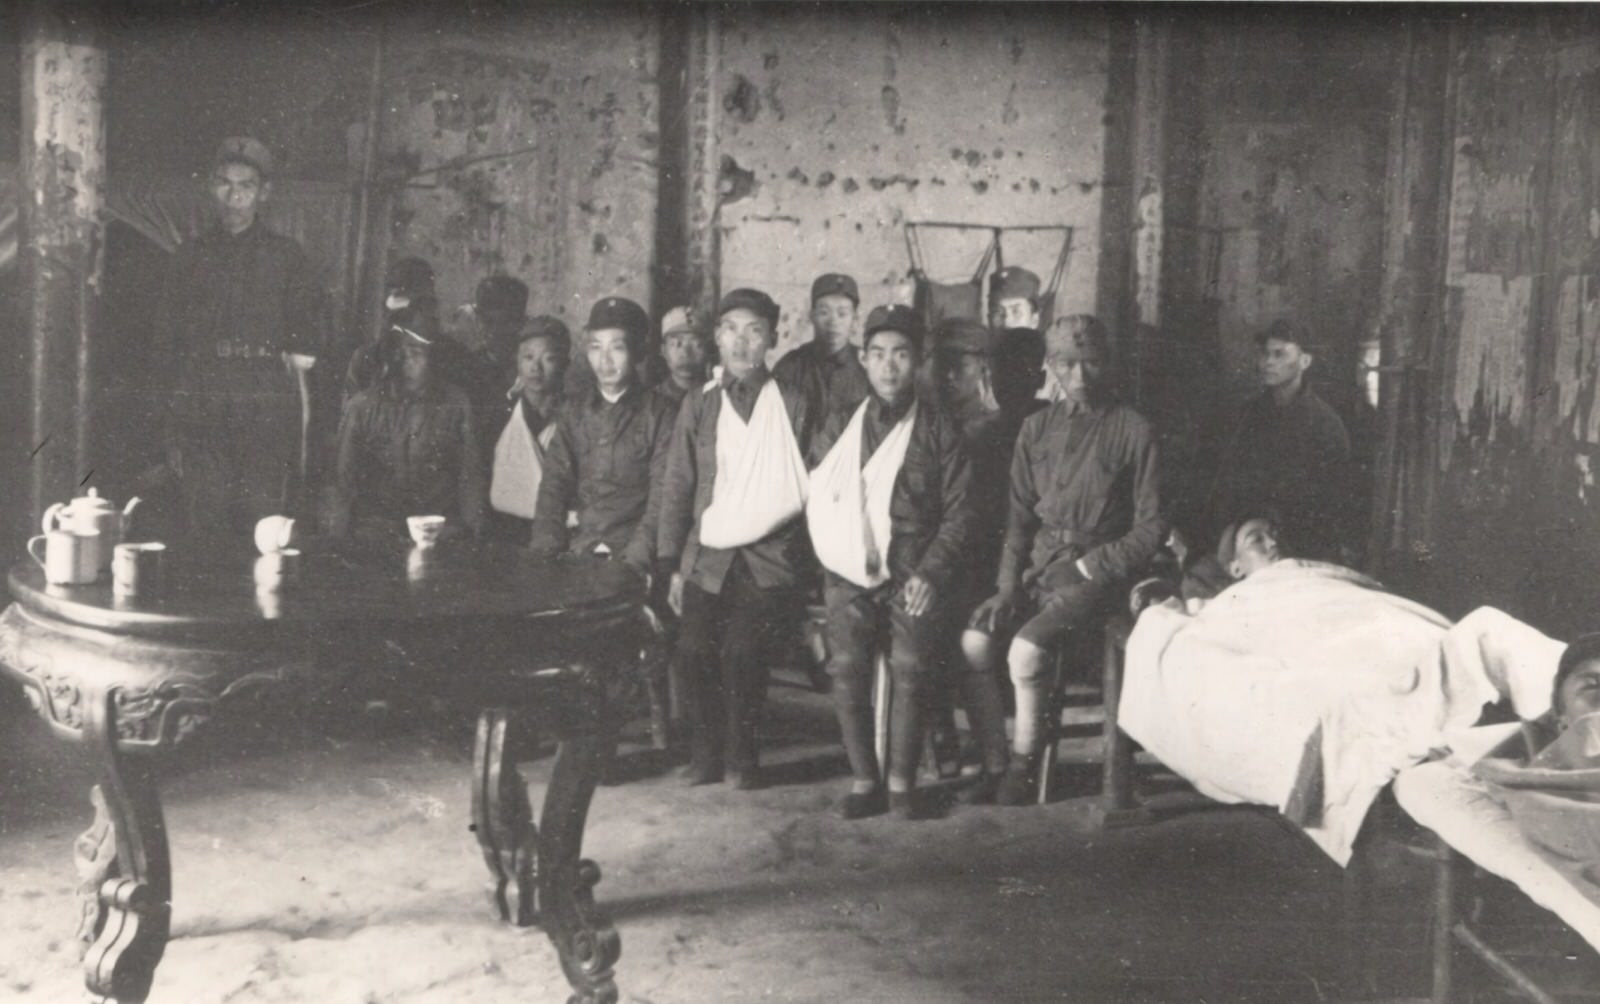 A hospital of the New 4th Army in an ancestral temple in North Kiangsu (Jiangsu) province, north of Shanghai. I spent 8 months with this Army in the field and helped care for their wounded. 1937-1940